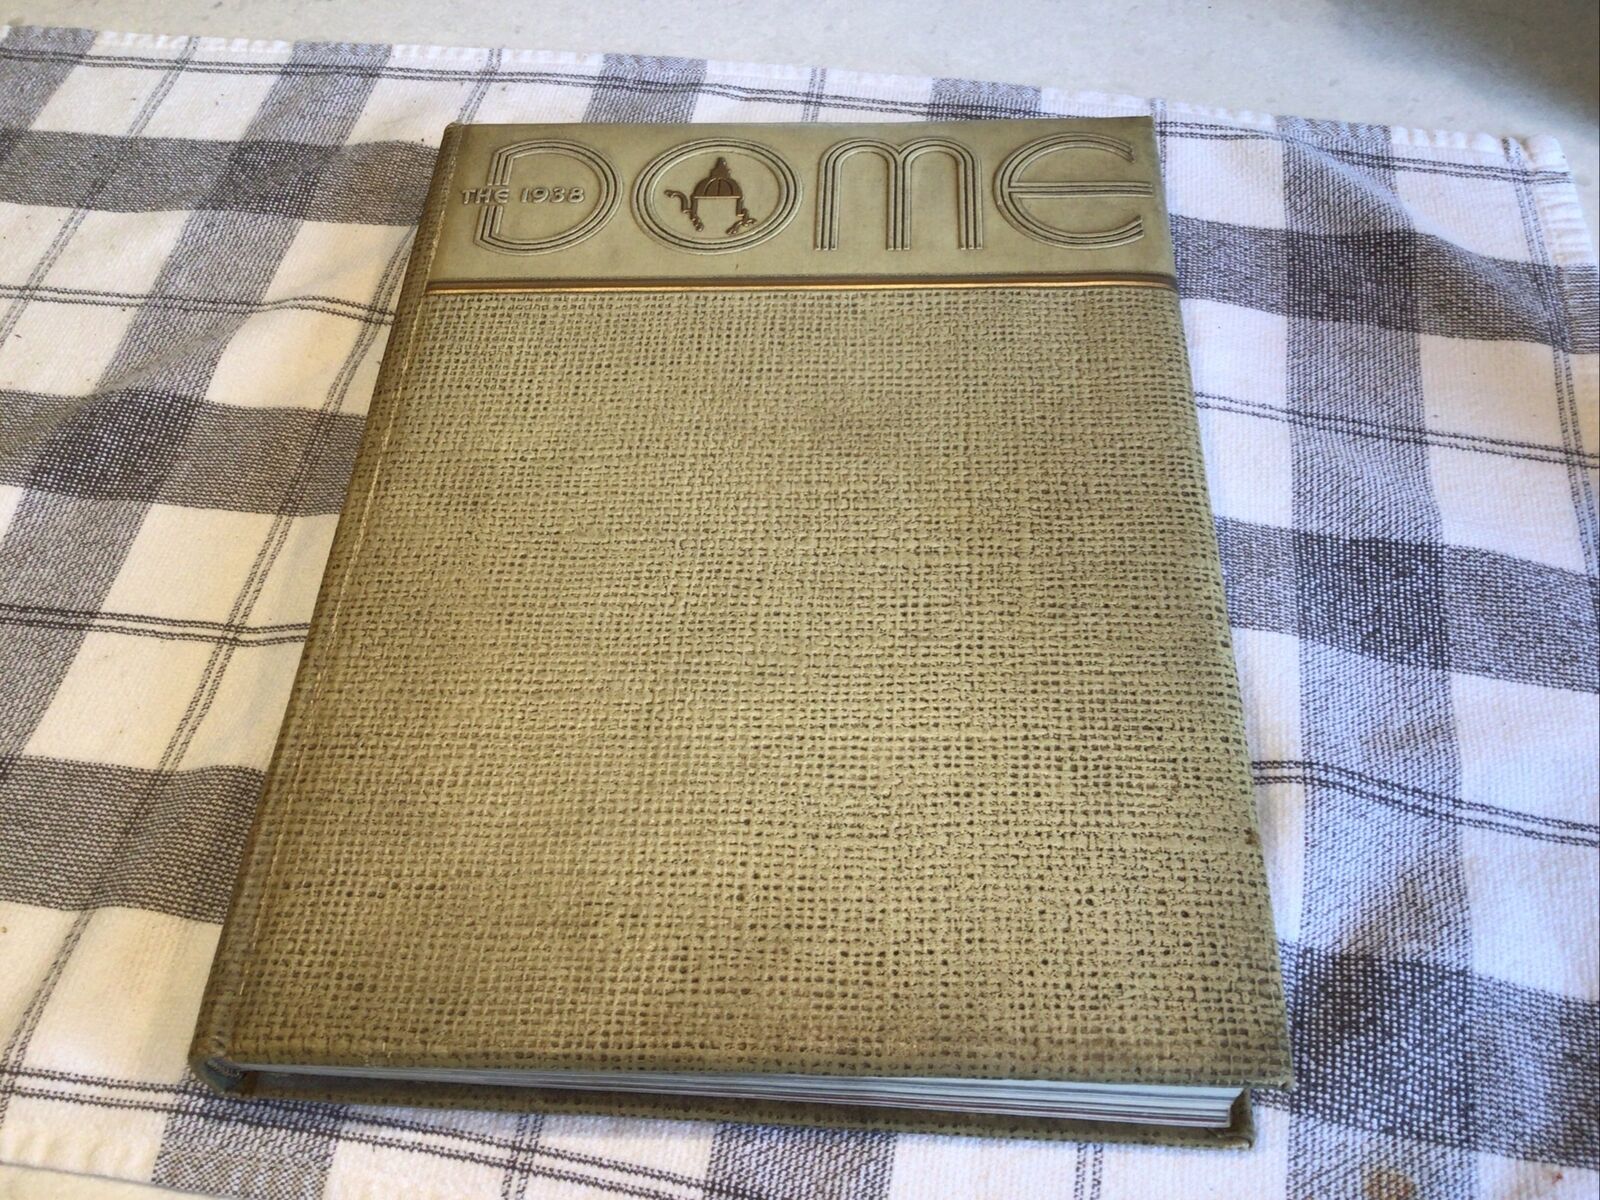 1938 THE DOME UNIVERSITY OF NOTRE DAME YEARBOOK - INDIANA - PHOTOS